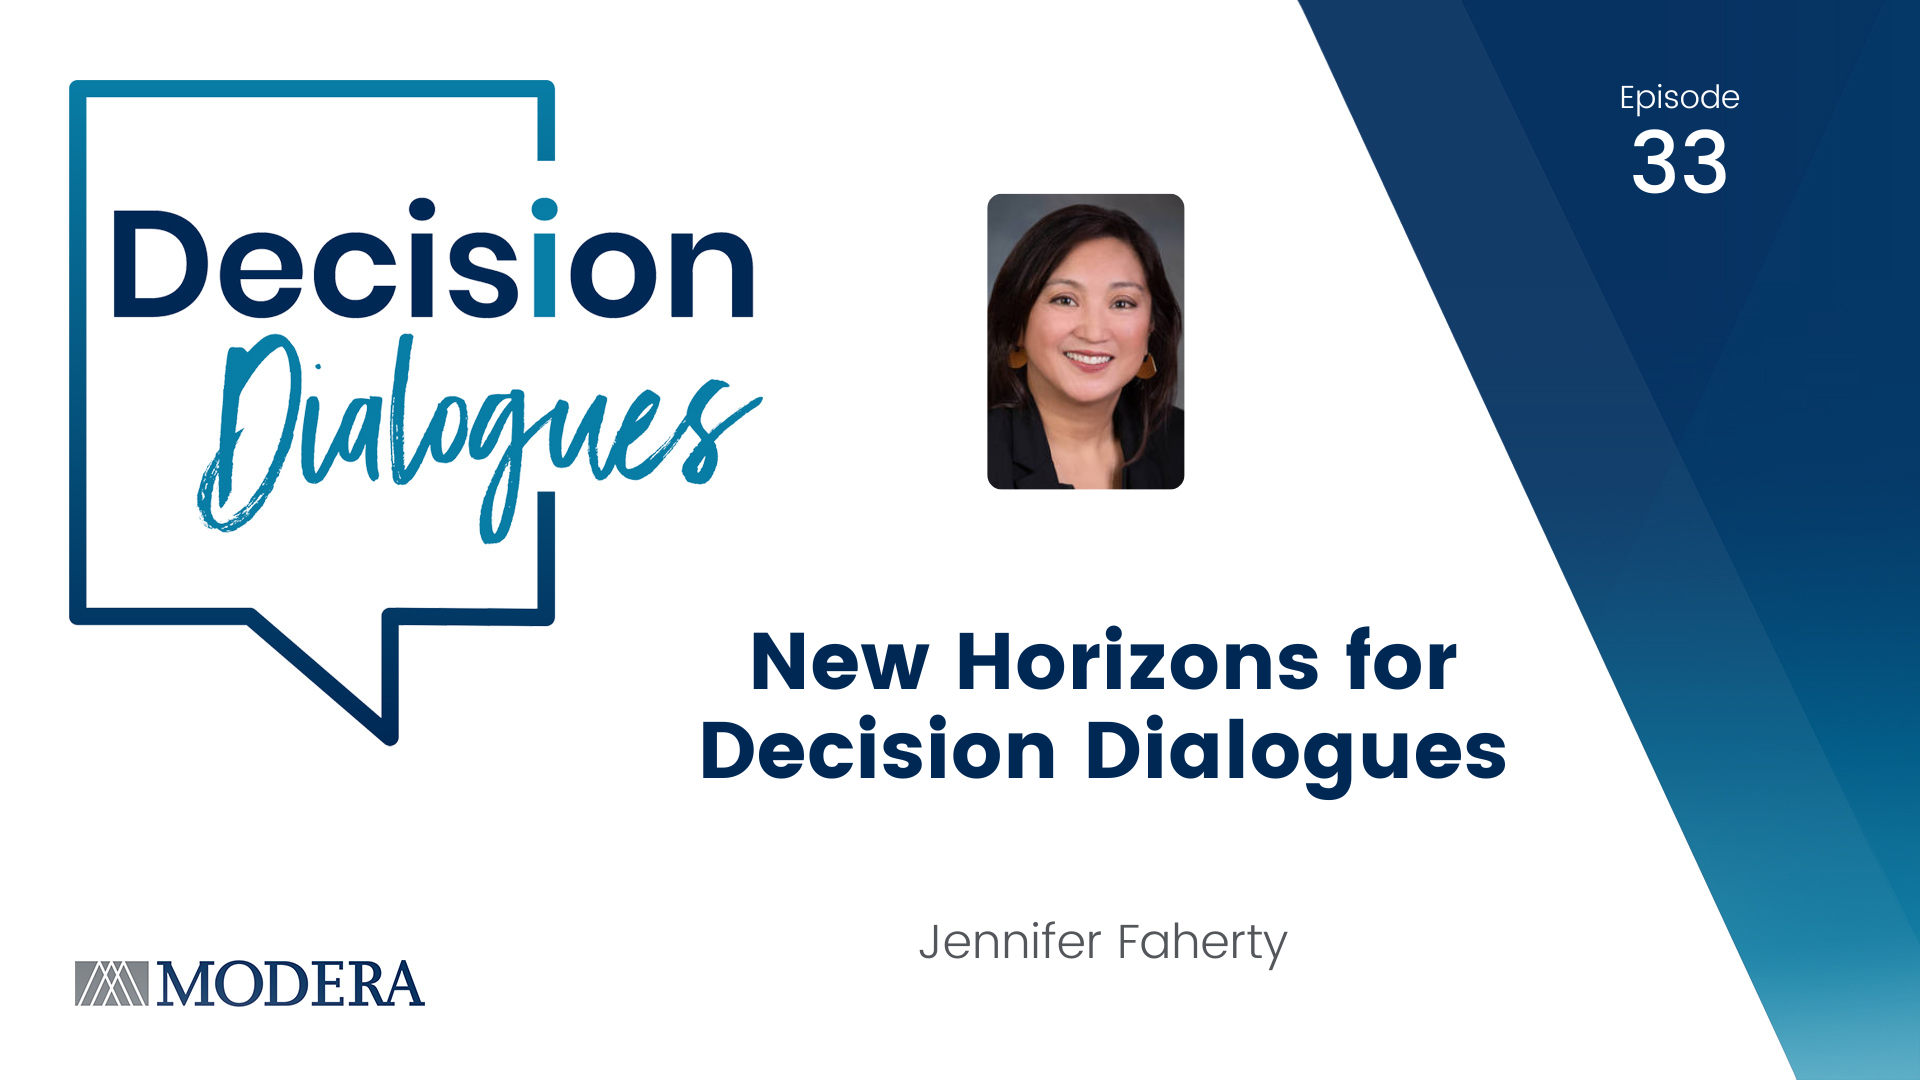 Decision Dialogues Featured Image Ep 33 - Jennifer Faherty